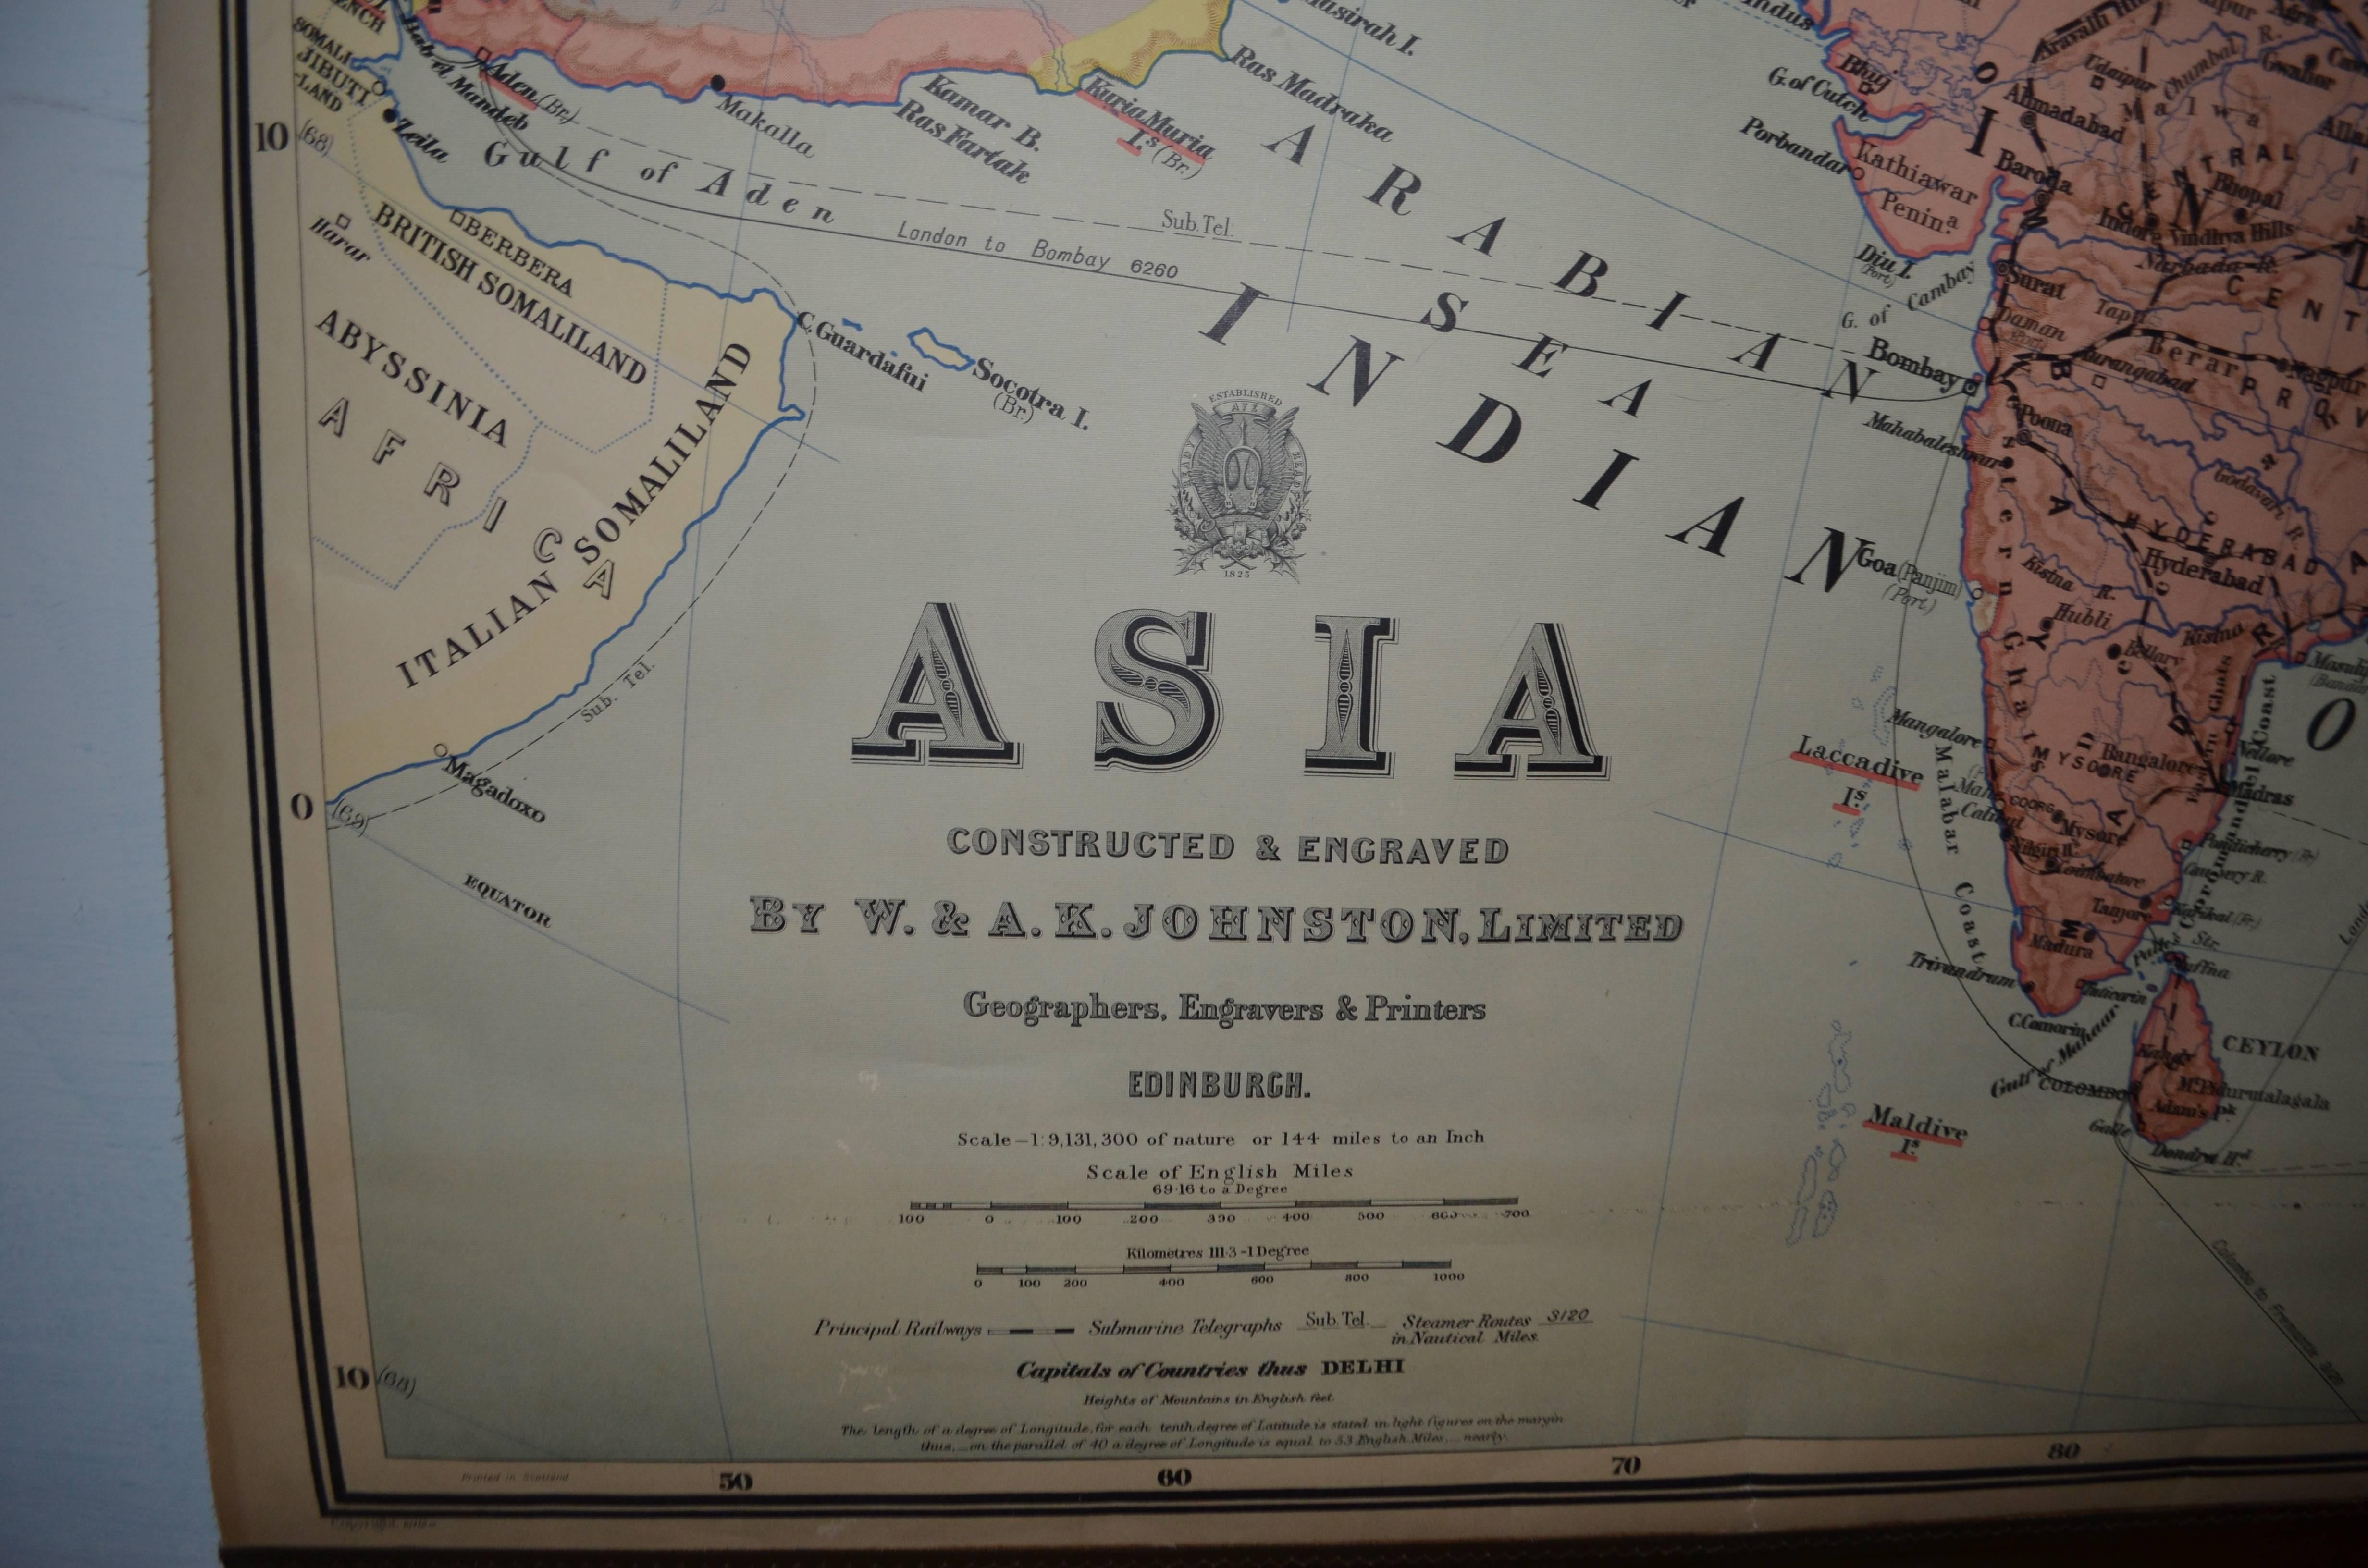 Scottish Map of Asia, Early 1900s